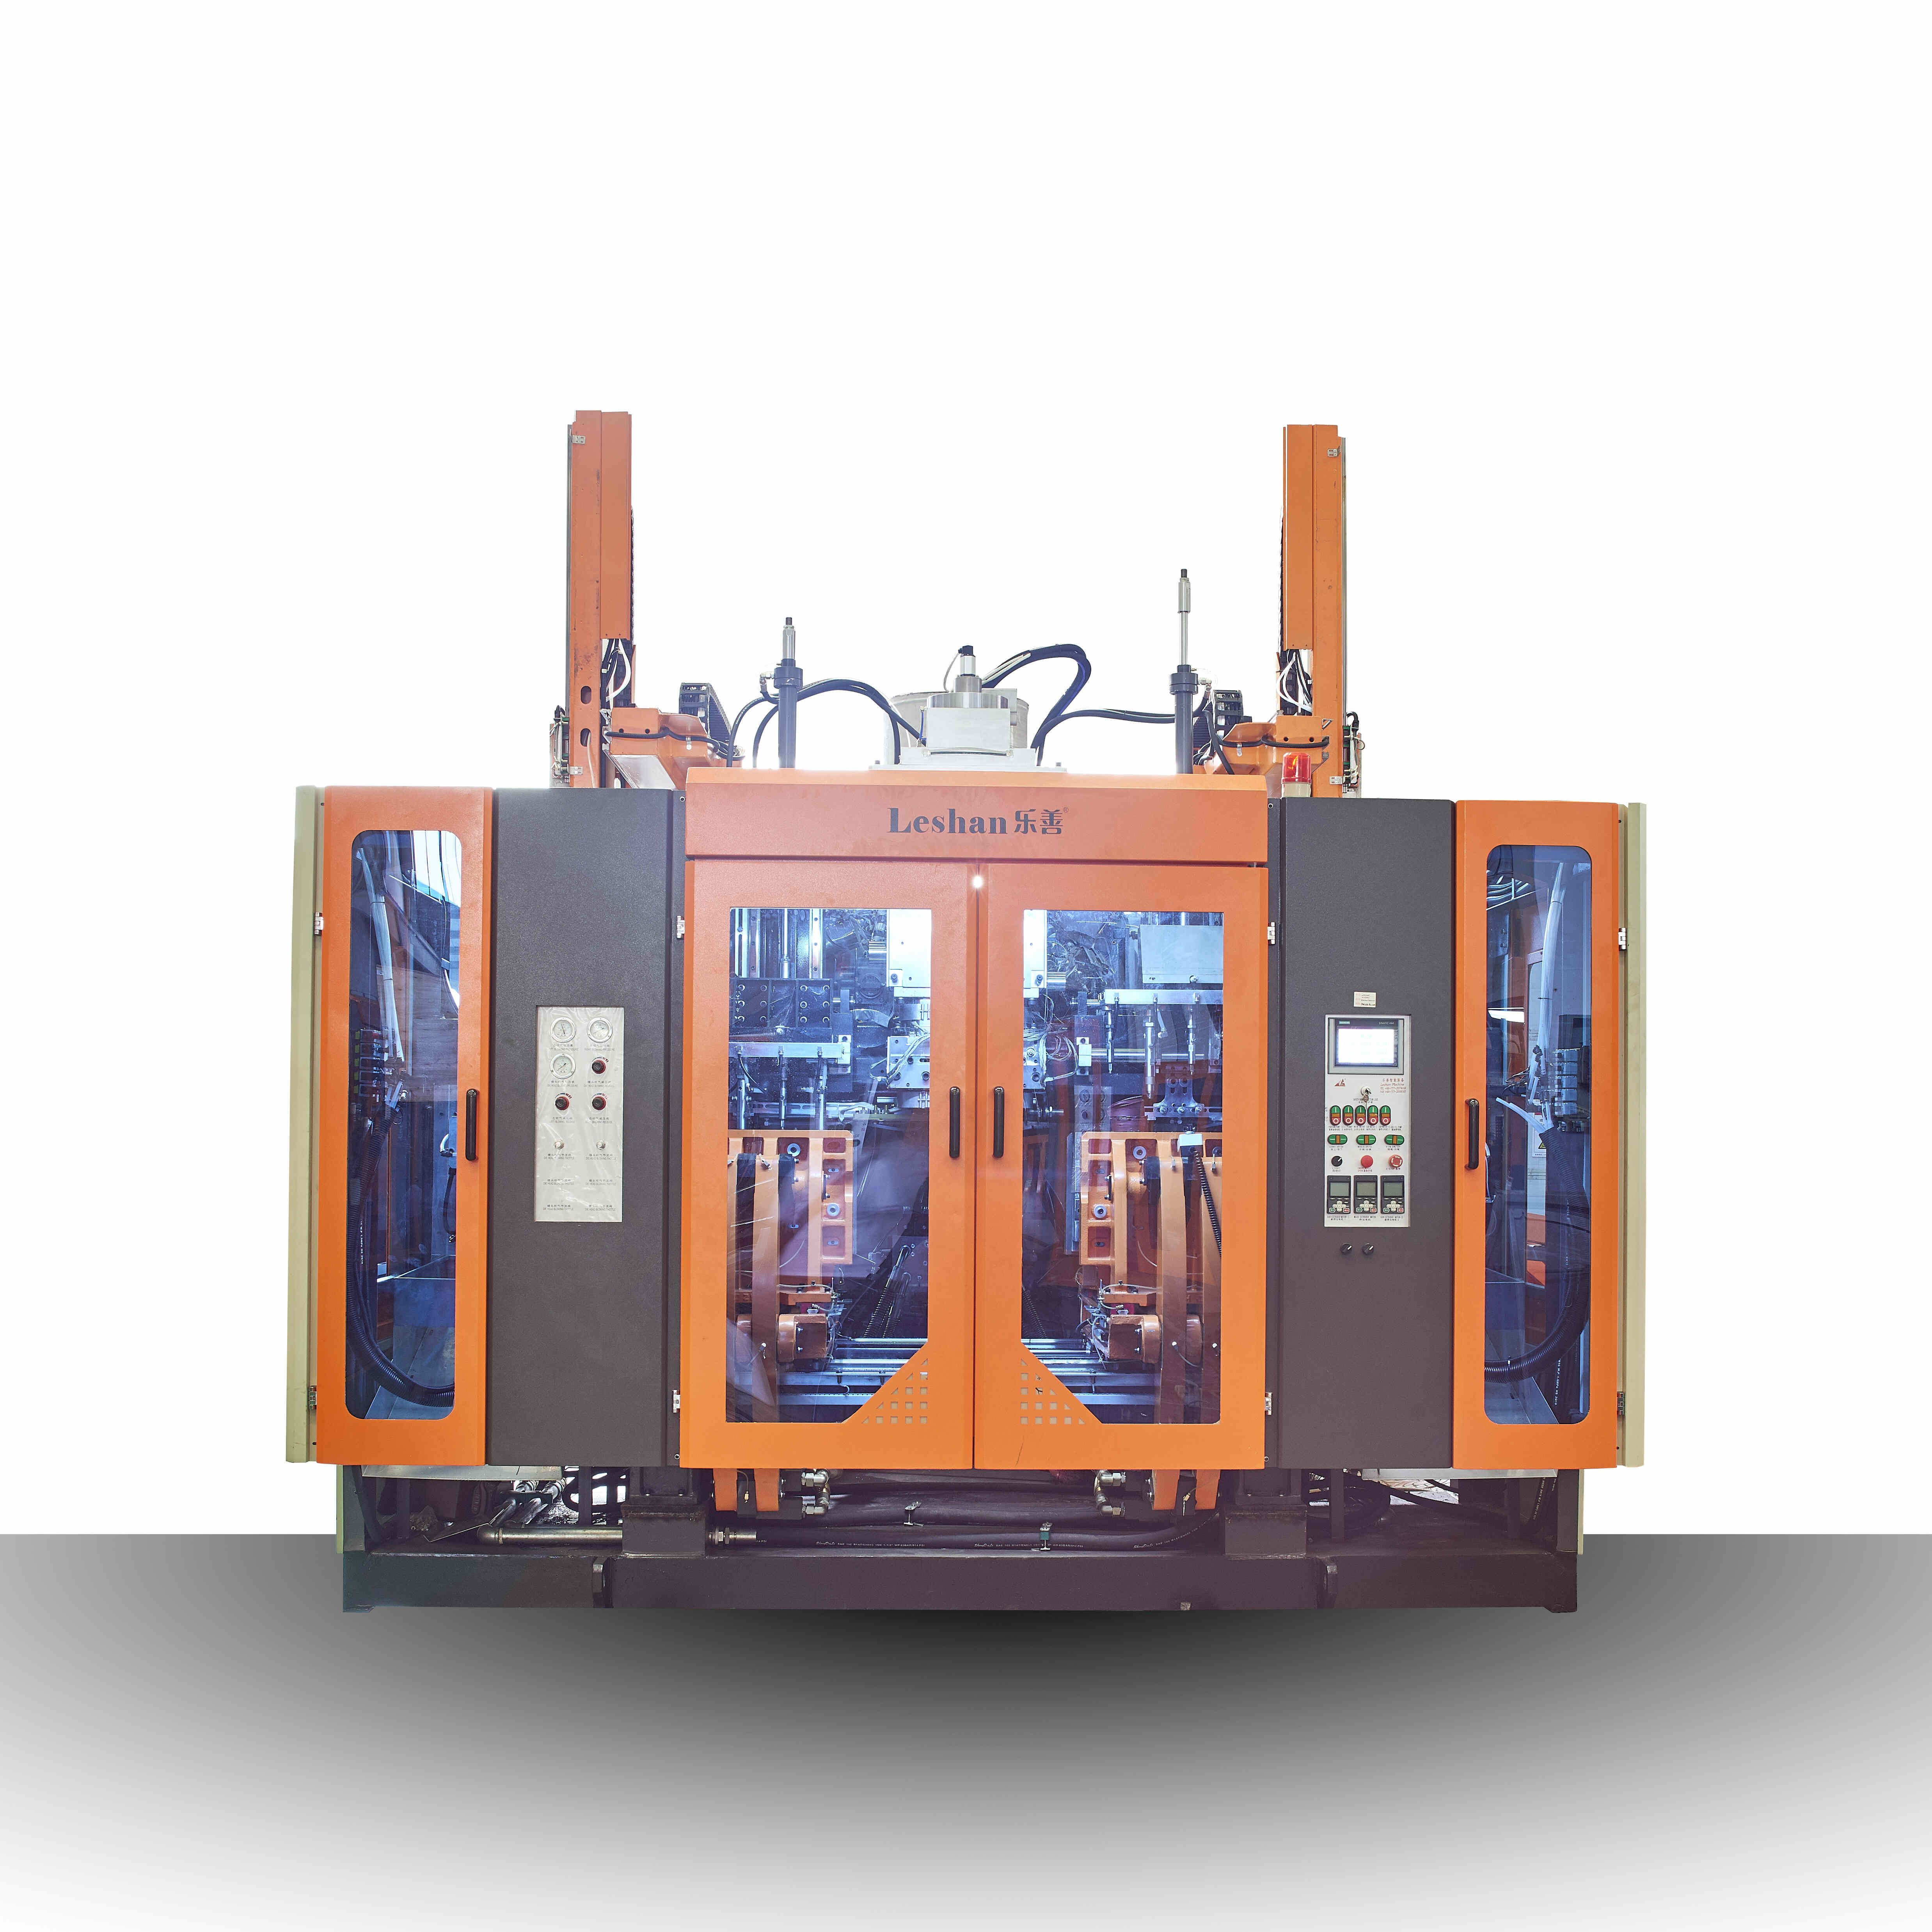 How long is the production cycle of Leshan blow molding machine? What is the lead time?